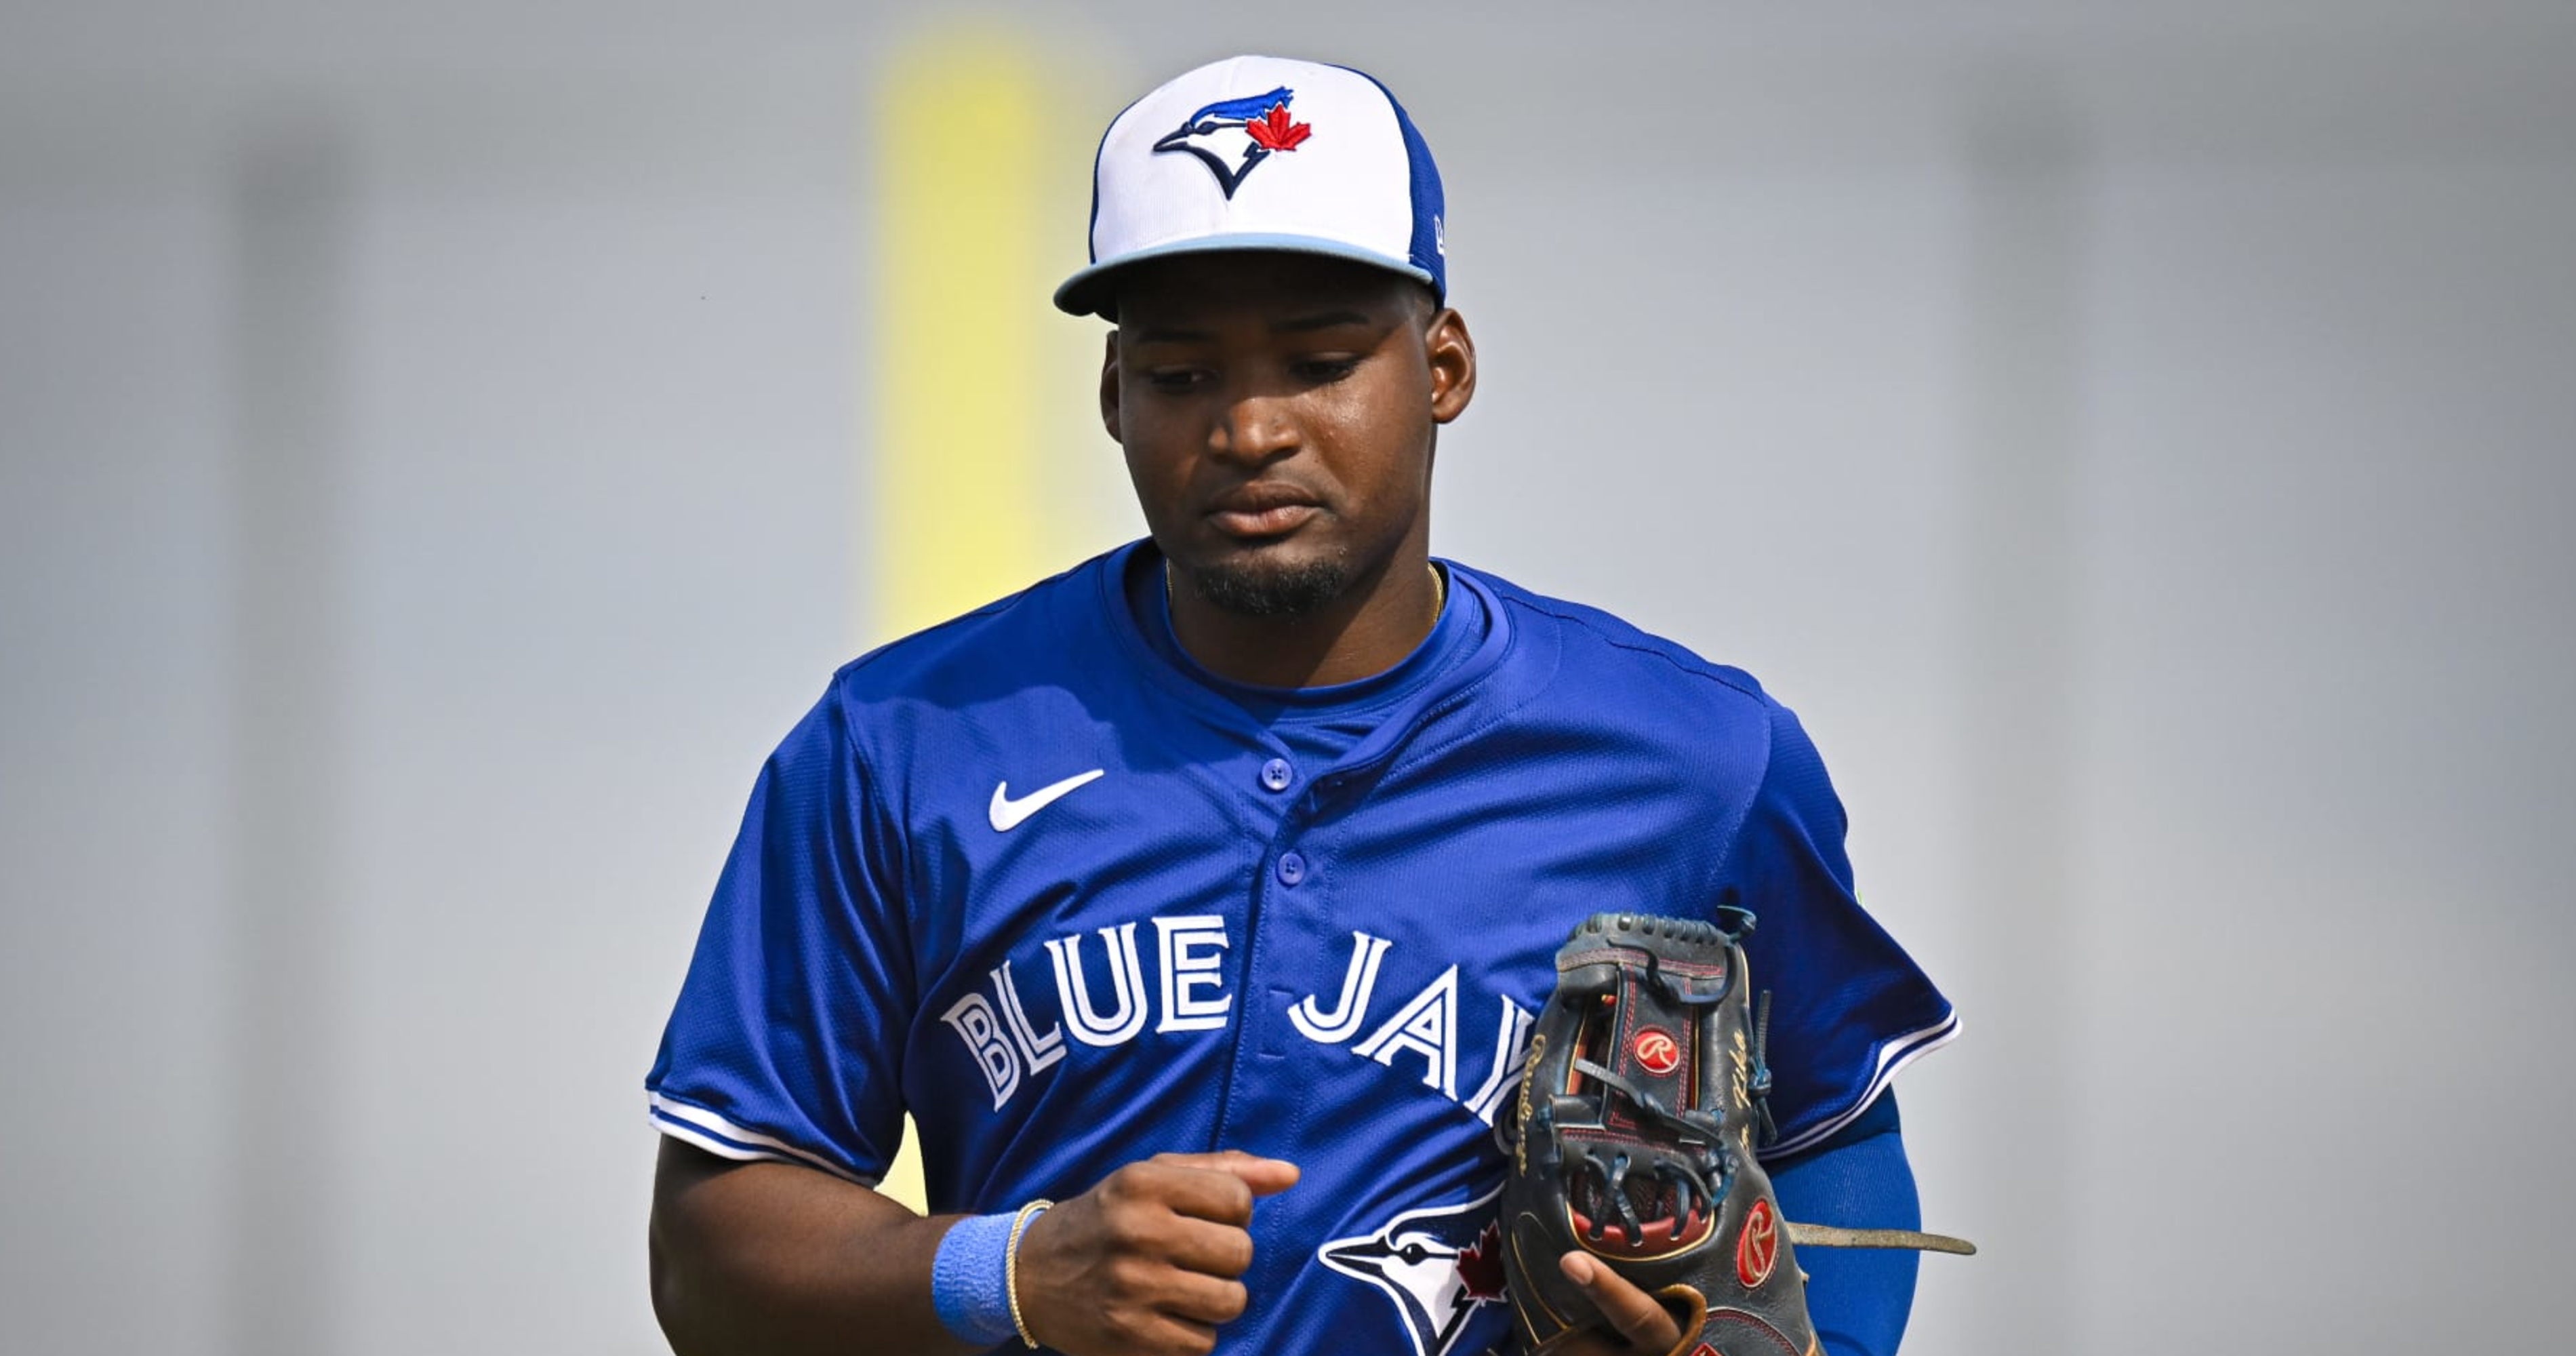 Blue Jays' Top Prospect Orelvis Martinez Suspended 80 Games by MLB for PED Violation